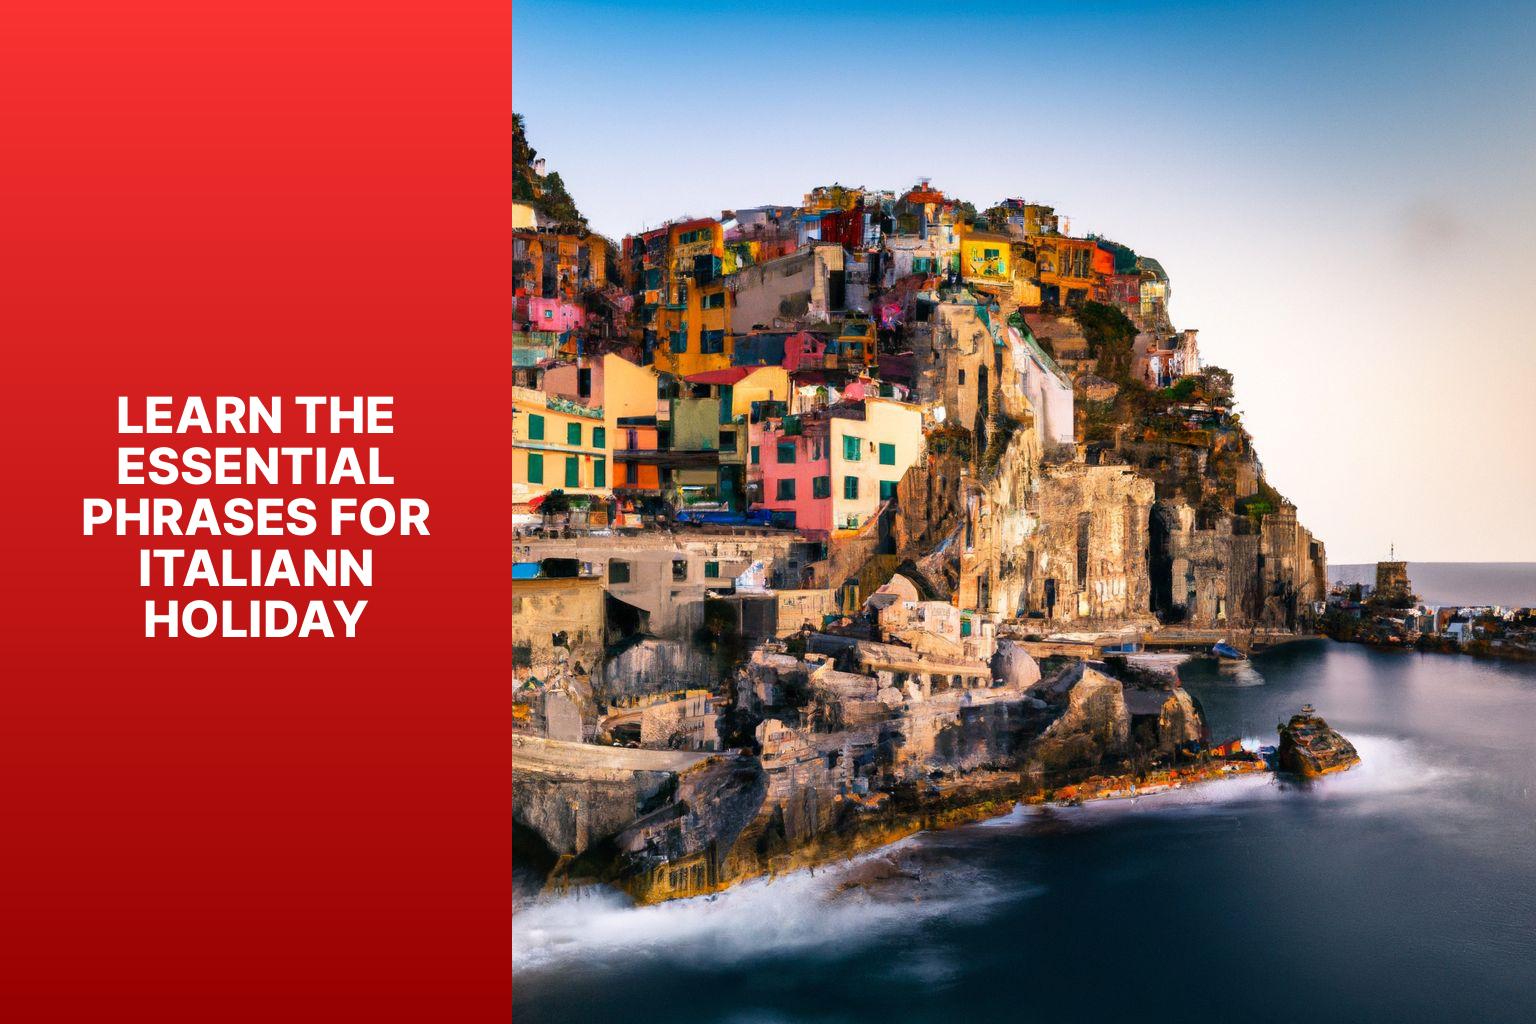 Learn the essential phrases for italiann holiday